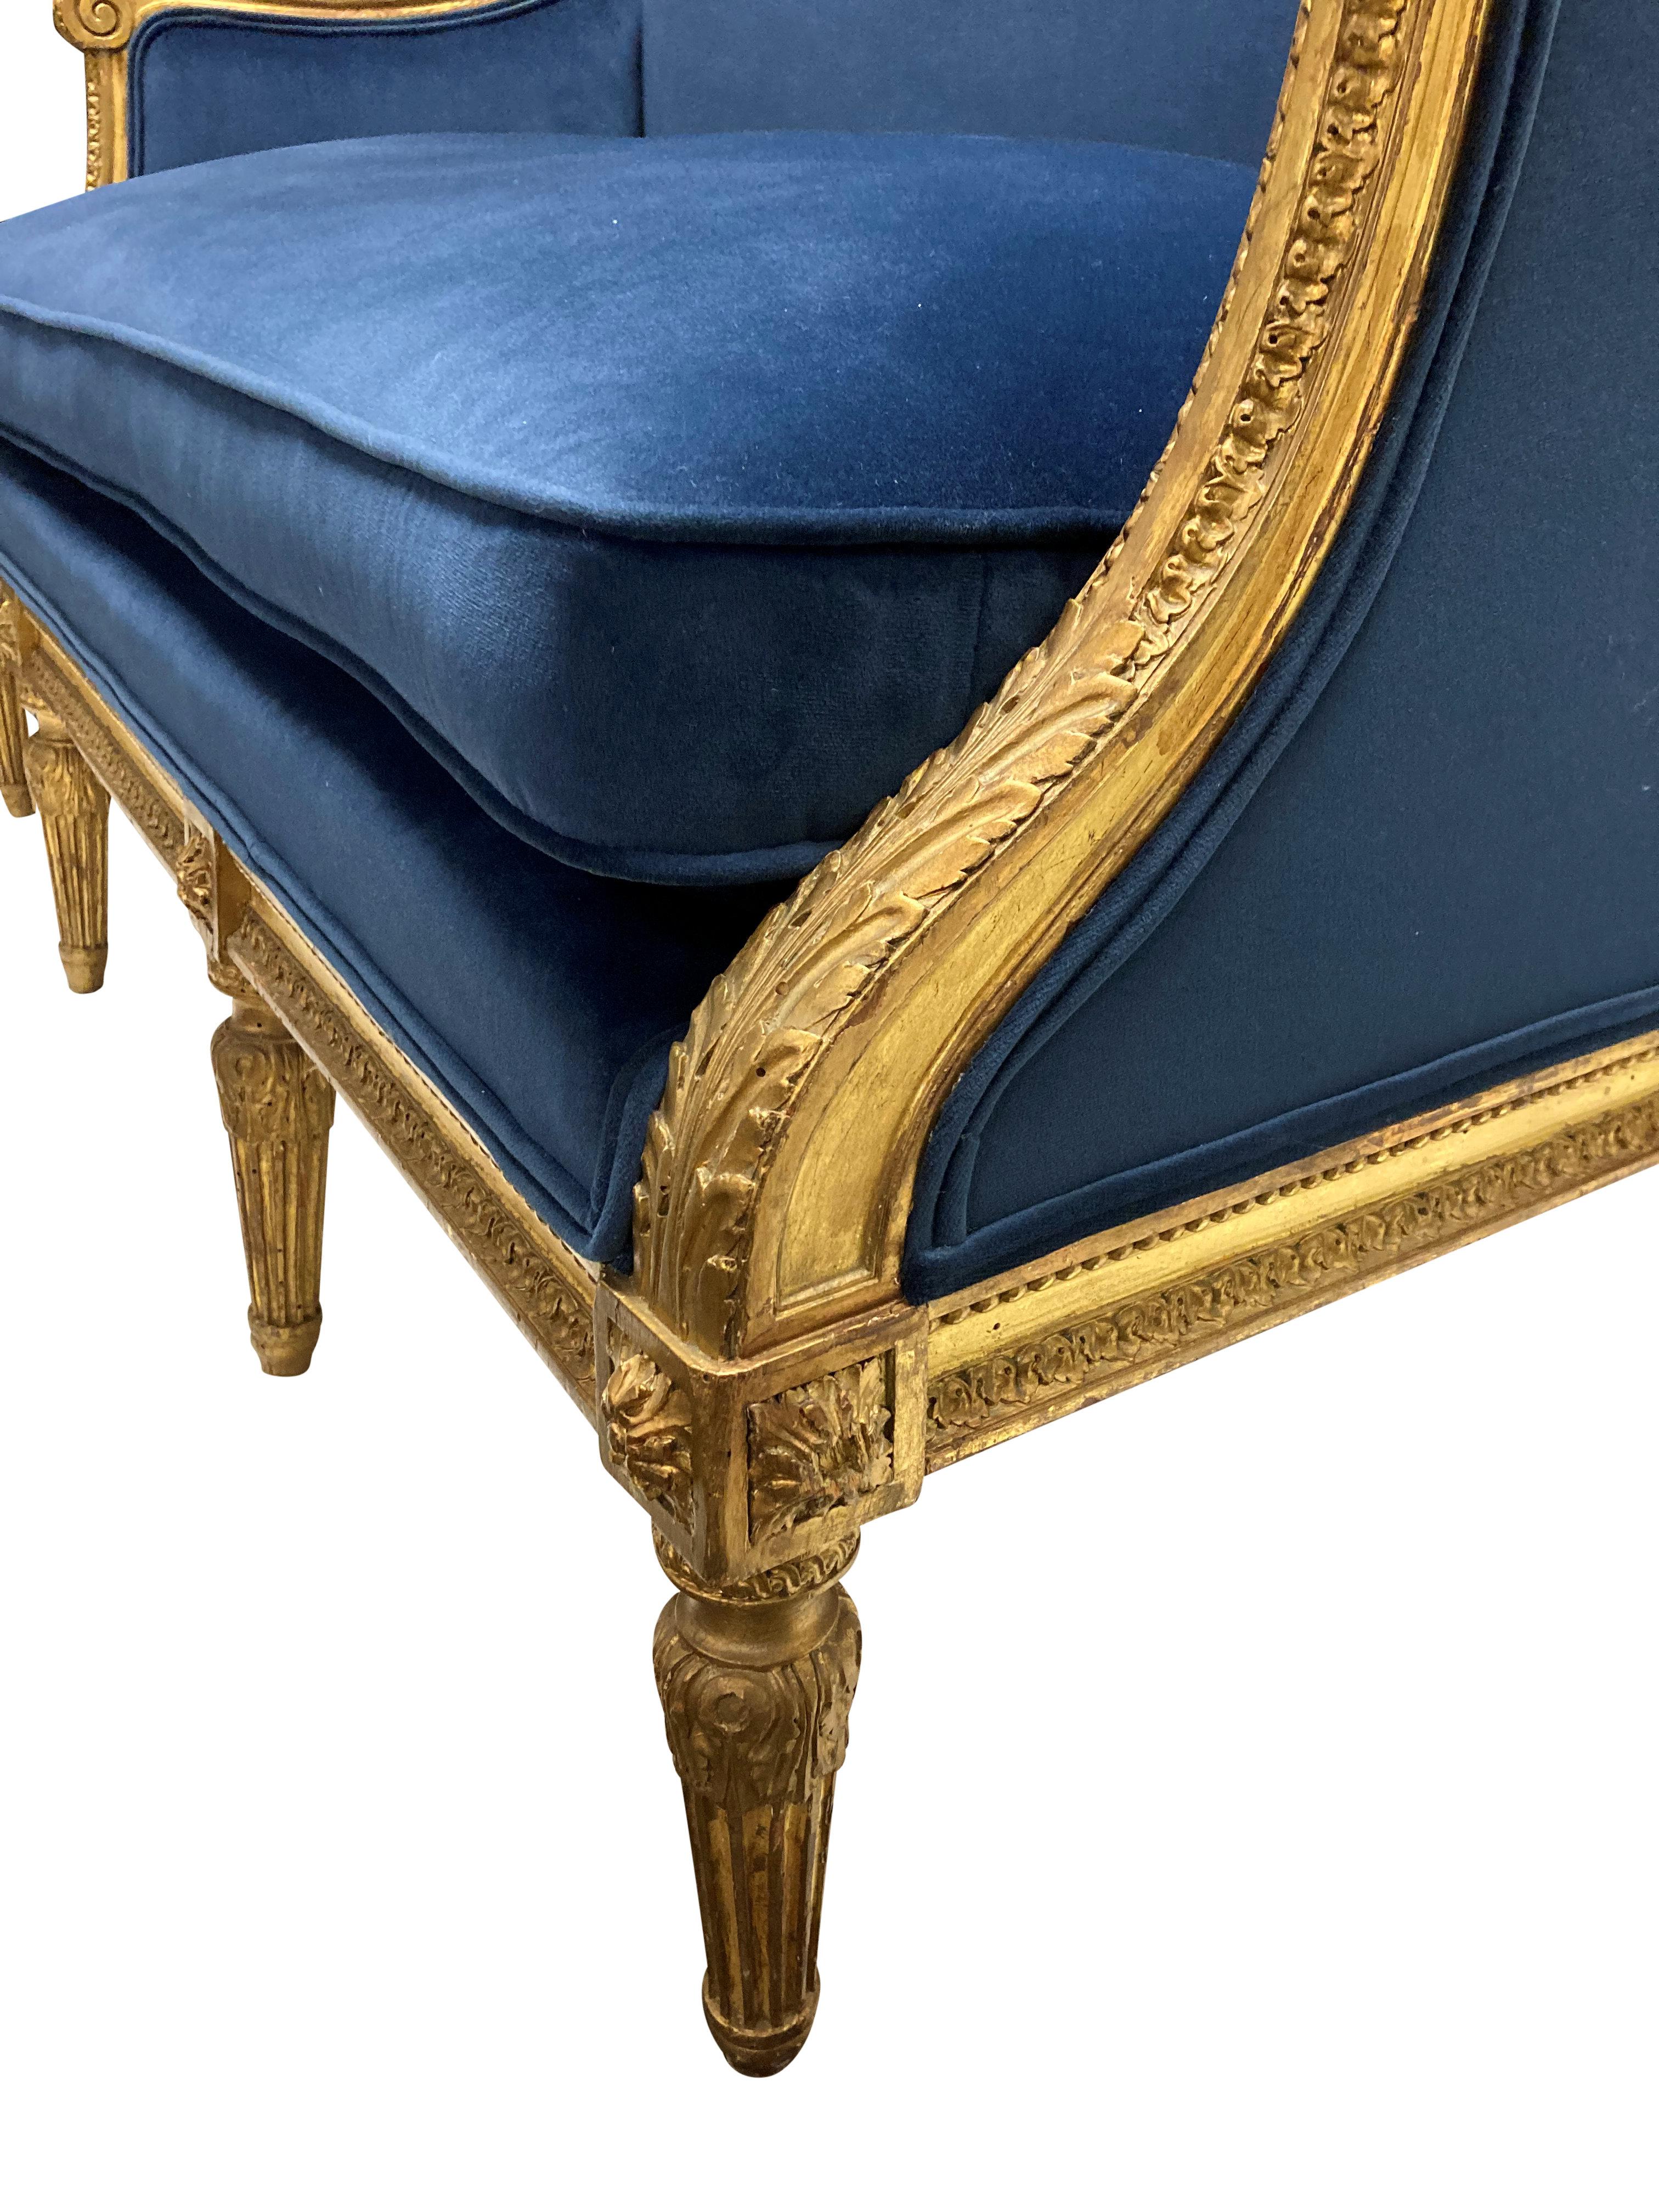 19th Century French Louis XVI Style Giltwood Settee In Blue Velvet For Sale